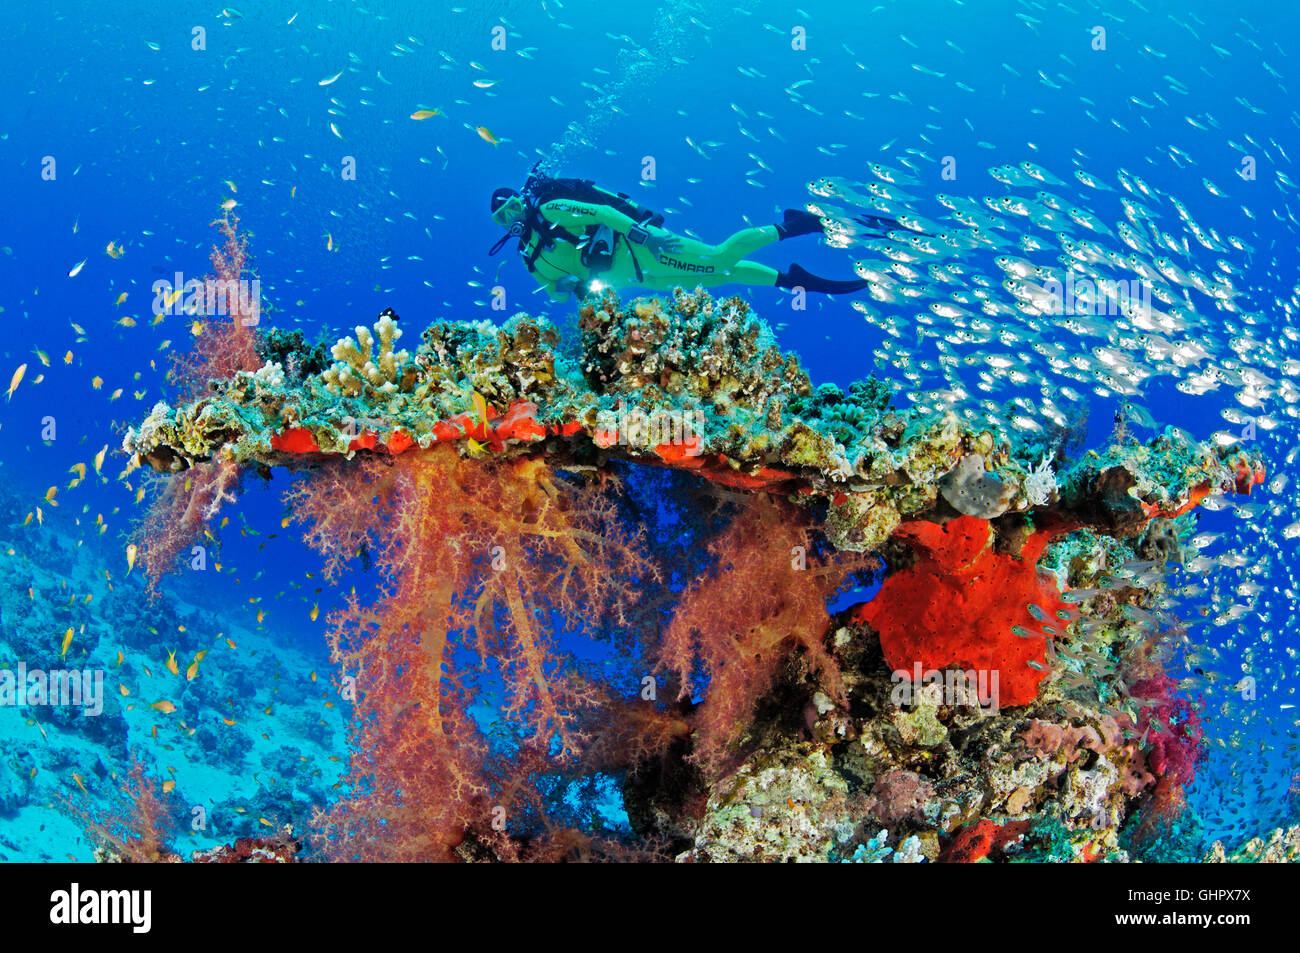 Coral reef with Hemprichs Red Soft Tree Coral and scuba diver, Hurghada, Giftun Island Reef, Red Sea, Egypt Stock Photo